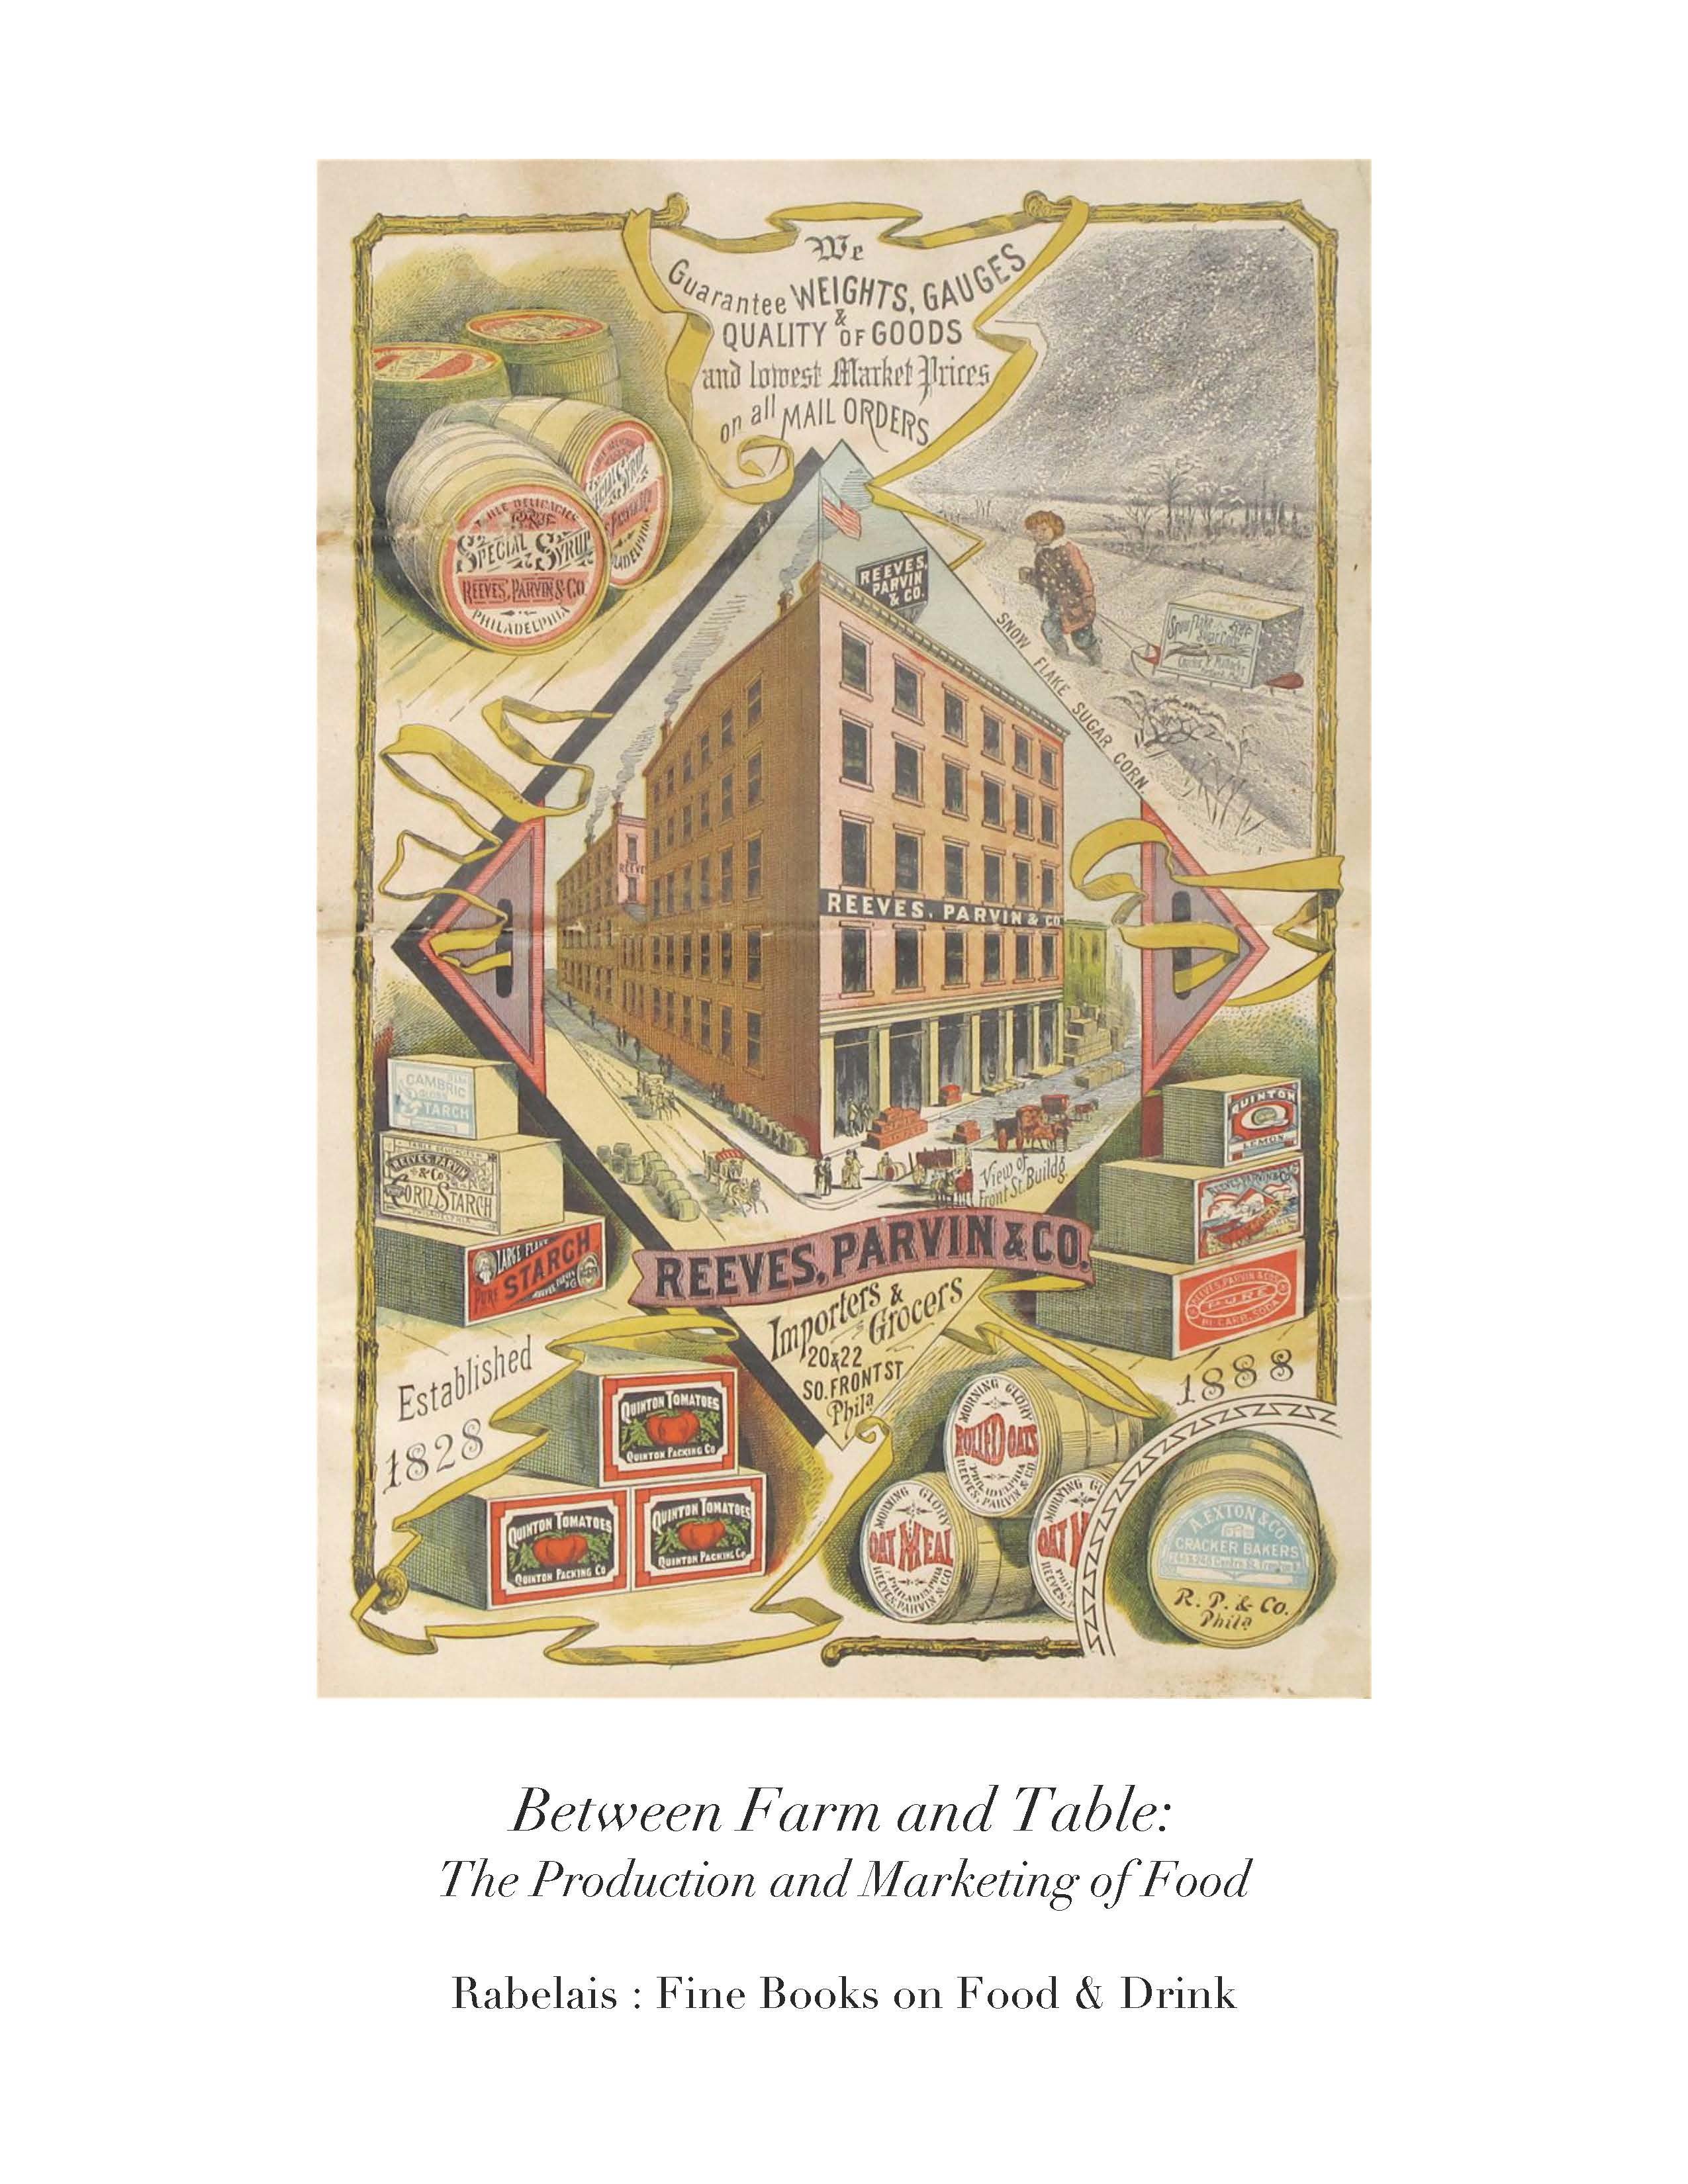 Between Farm & Table: The Production & Marketing of Food